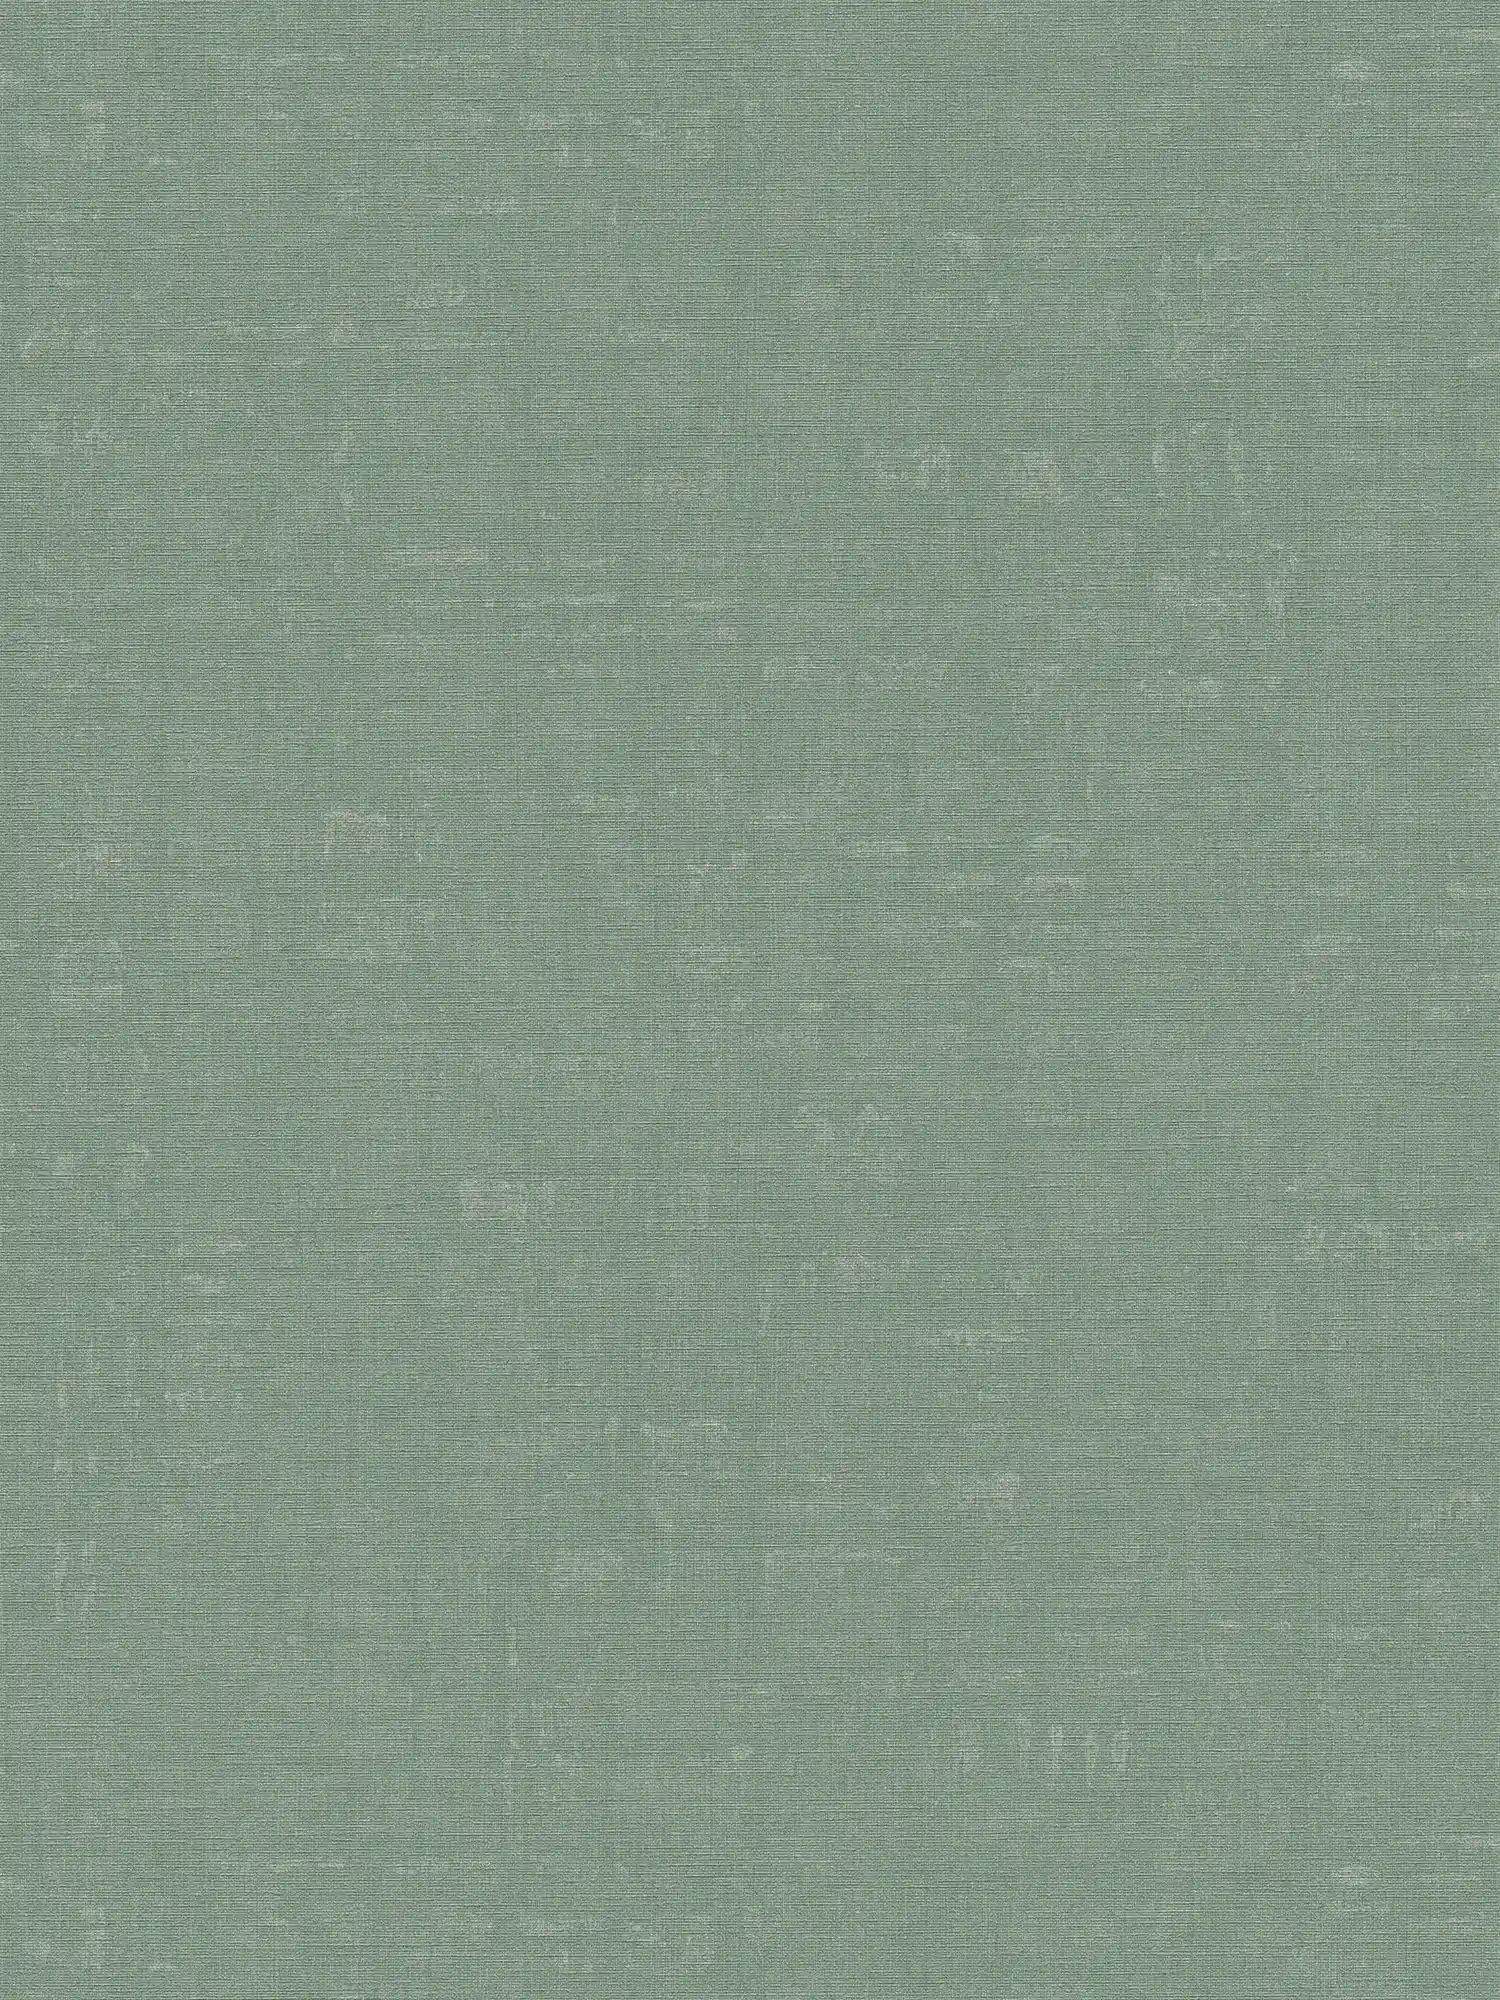 Green wallpaper plain and mottled with texture embossing
